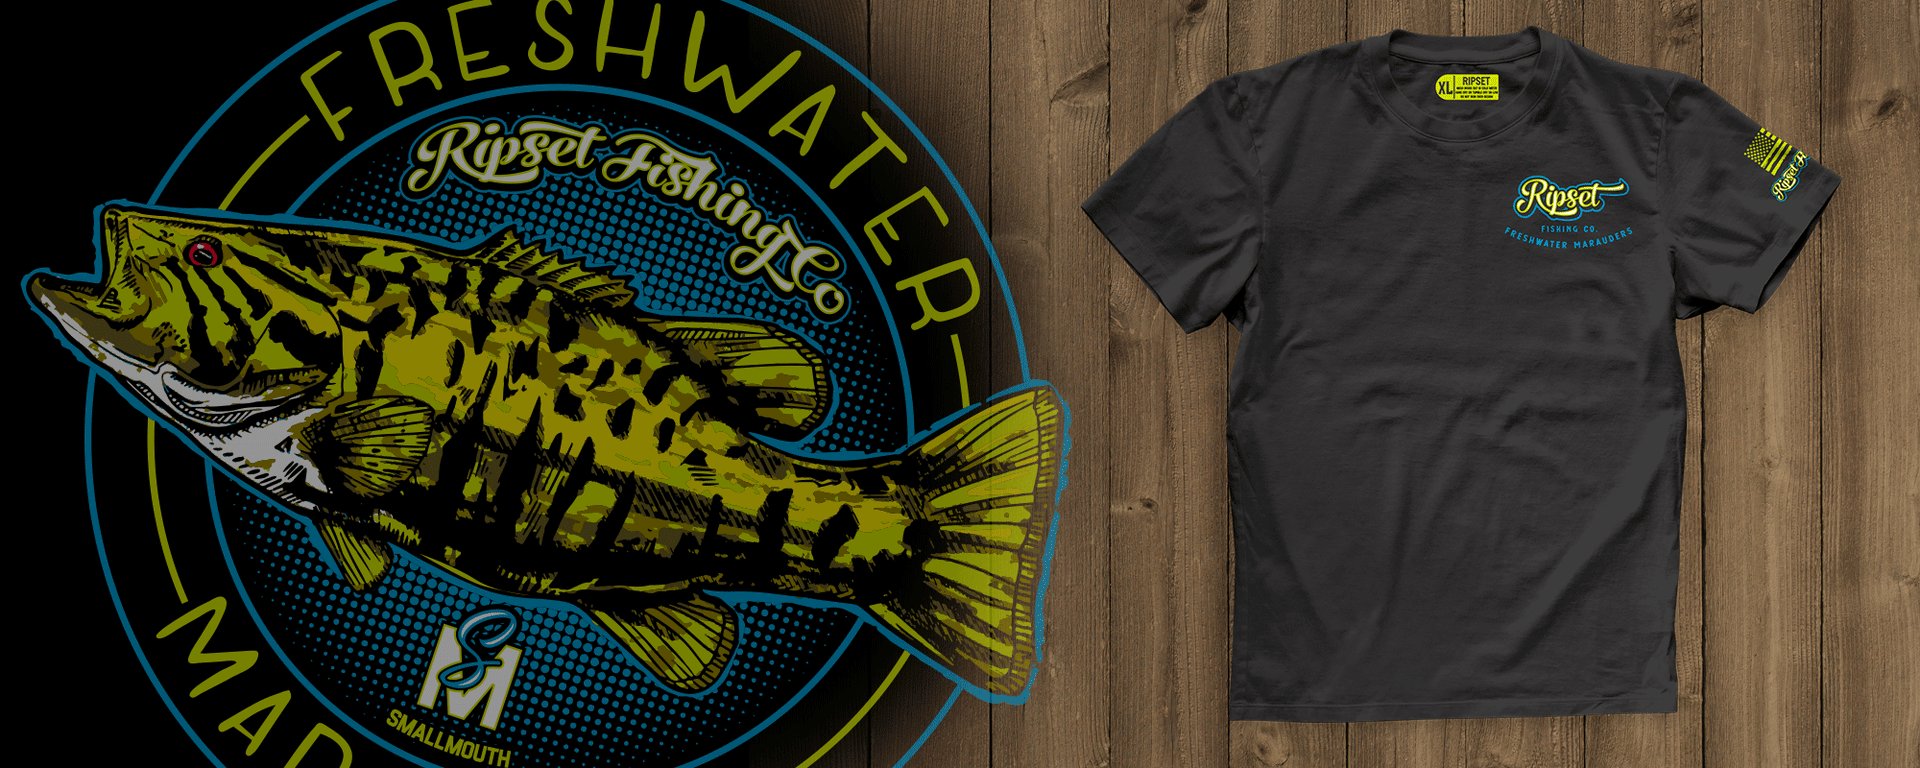 Your Premier Source for Freshwater Fishing Apparel